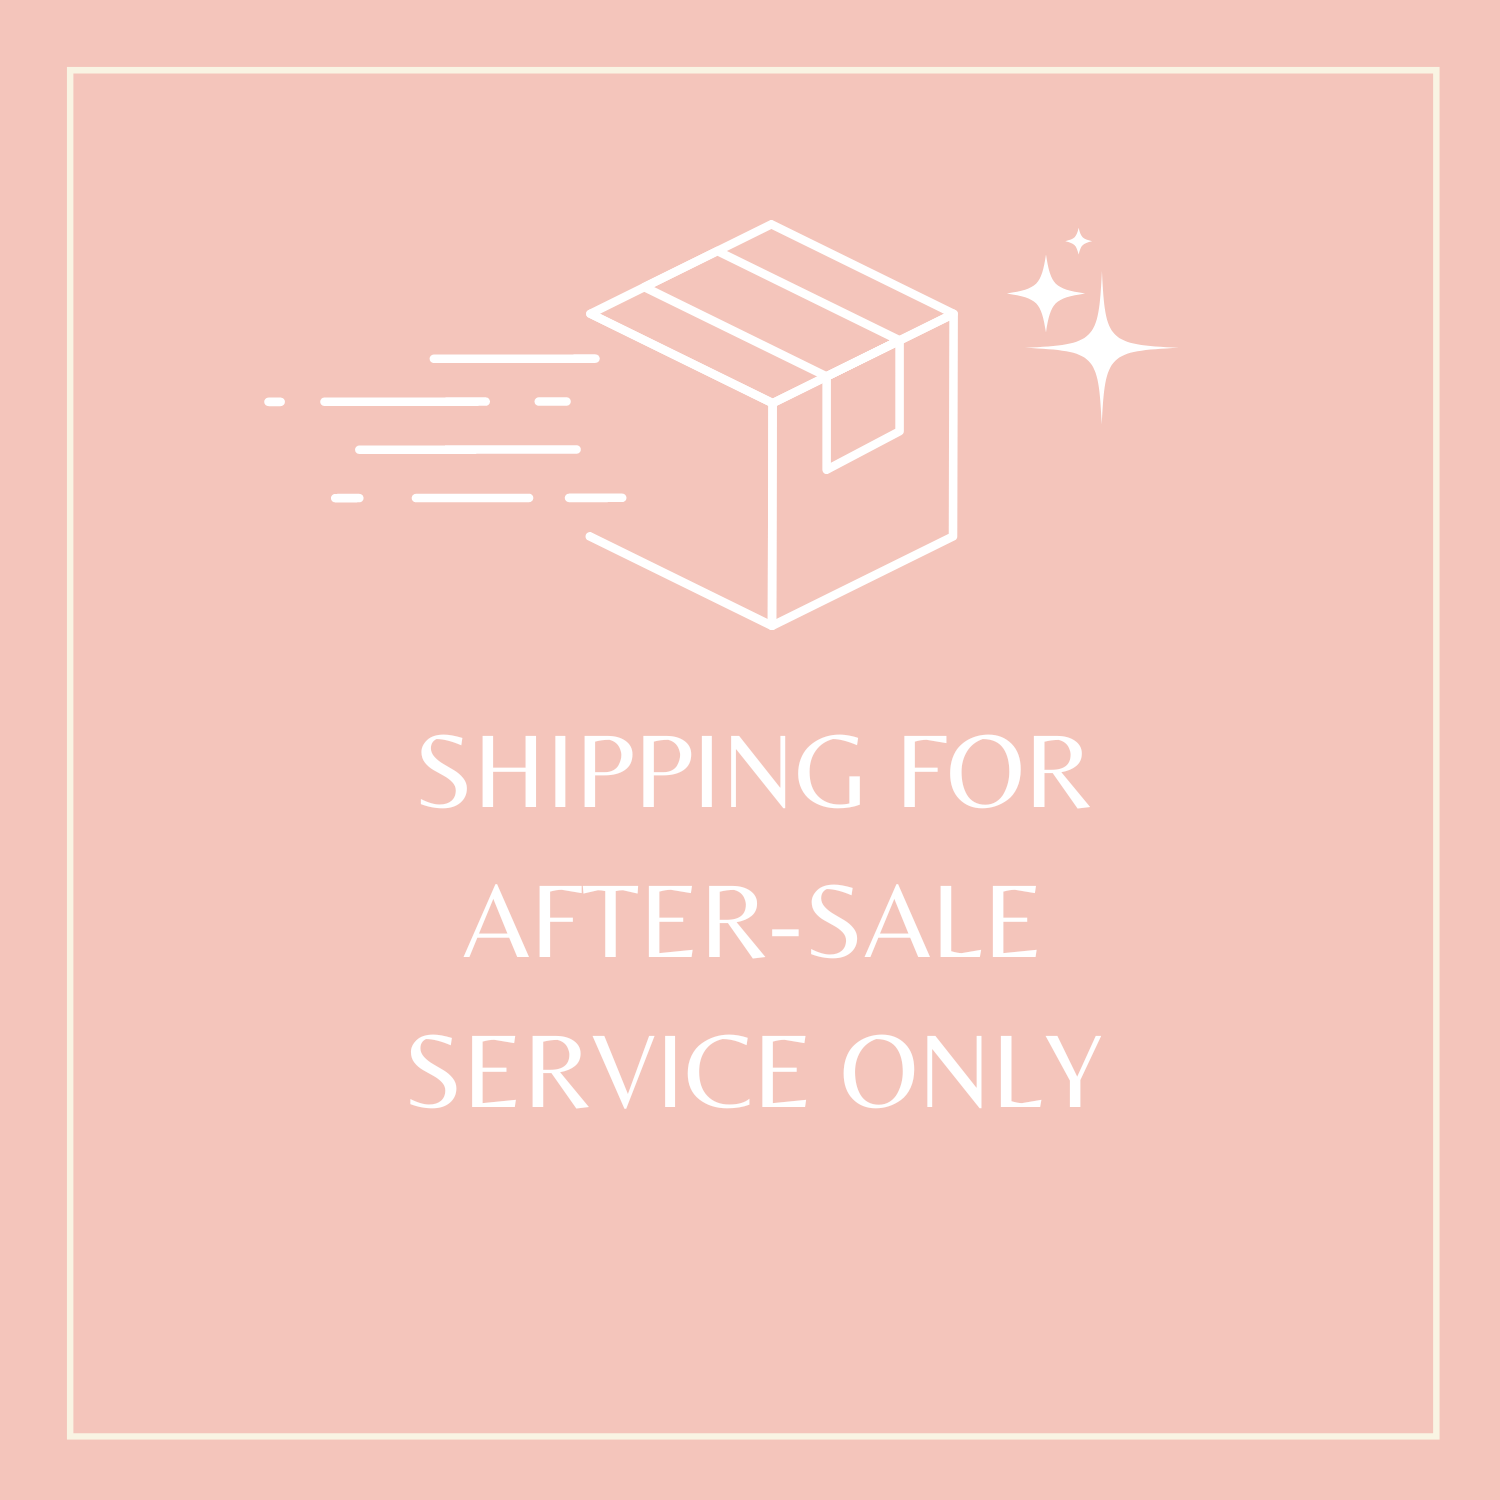 SHIPPING FOR AFTER-SALE SERVICE ONLY 2